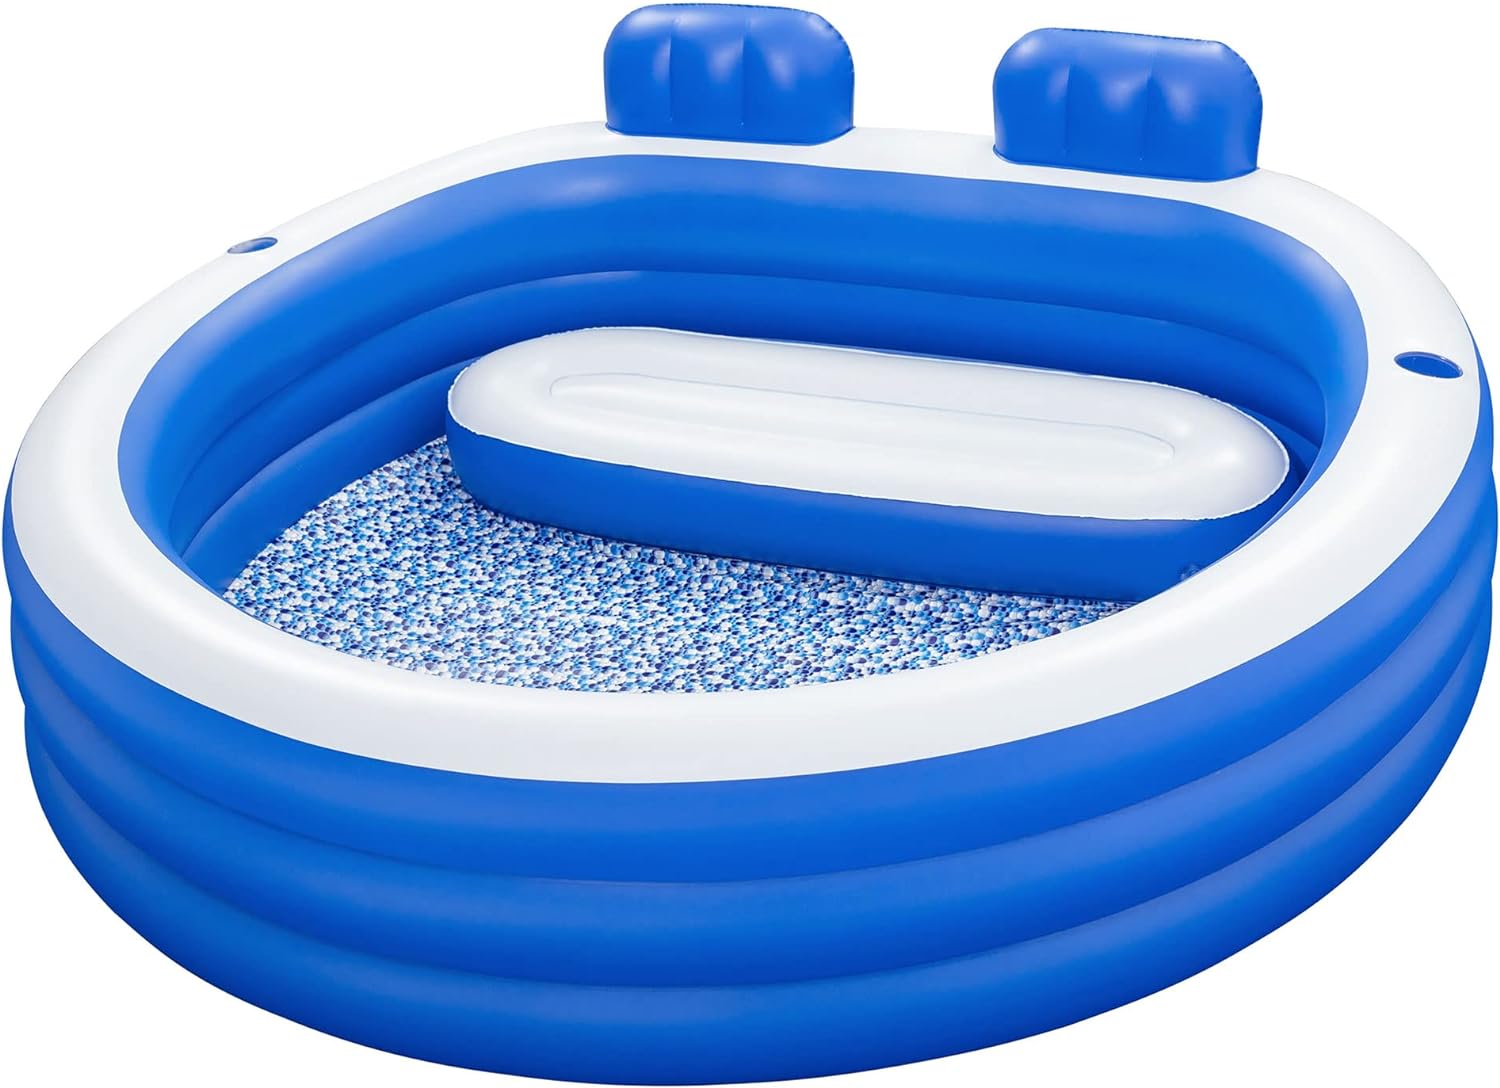 H2OGO! Splash Paradise 7'7 x 7'2 x 31 Inflatable Family Pool | Blow Up Swimming Pool for Kids and Adults | Includes Headrests, Bench Seat, Built-in Cup Holders